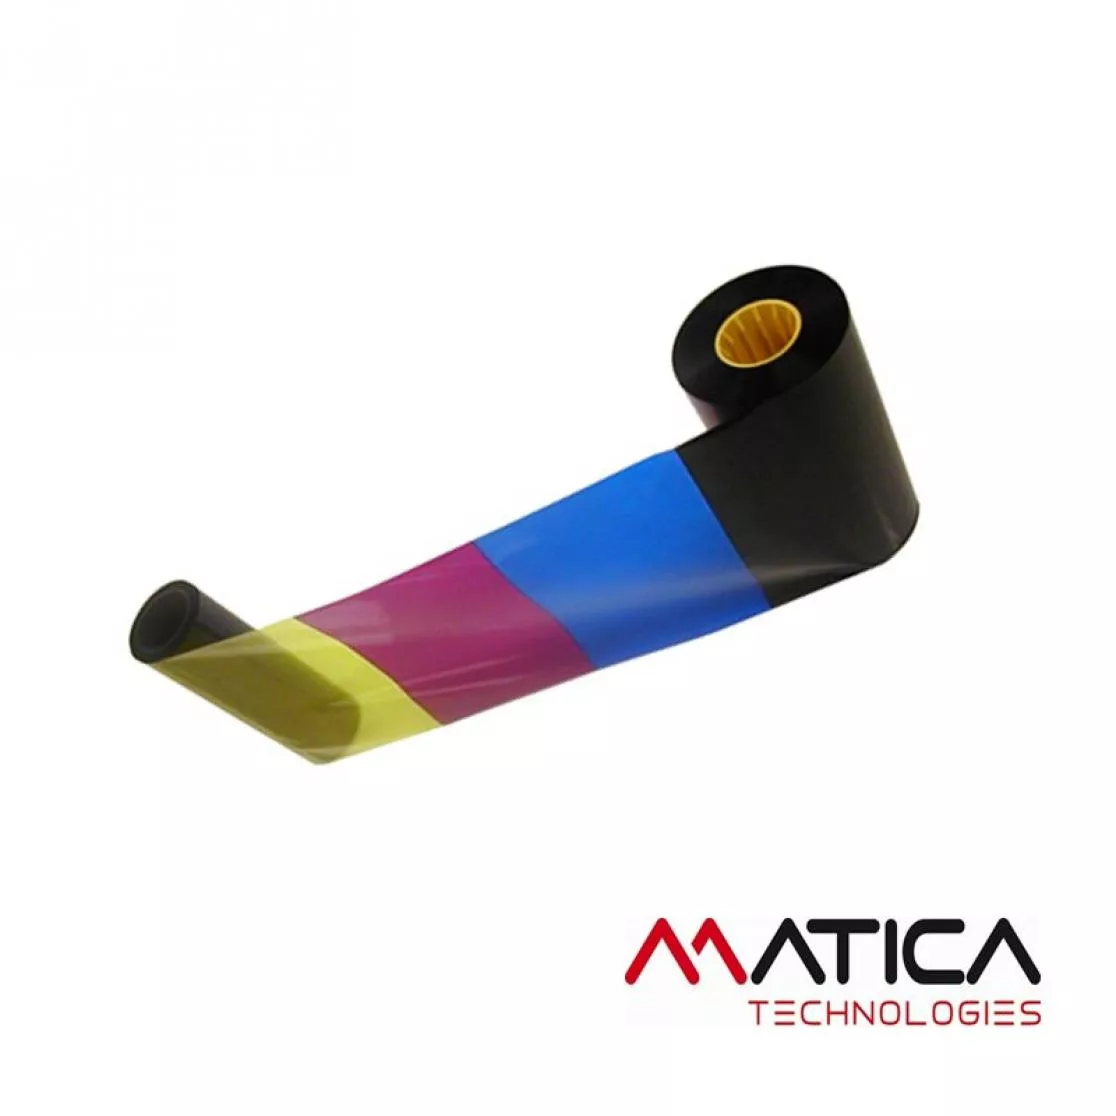 Ribbon Colorful and UV for Matica XL8300